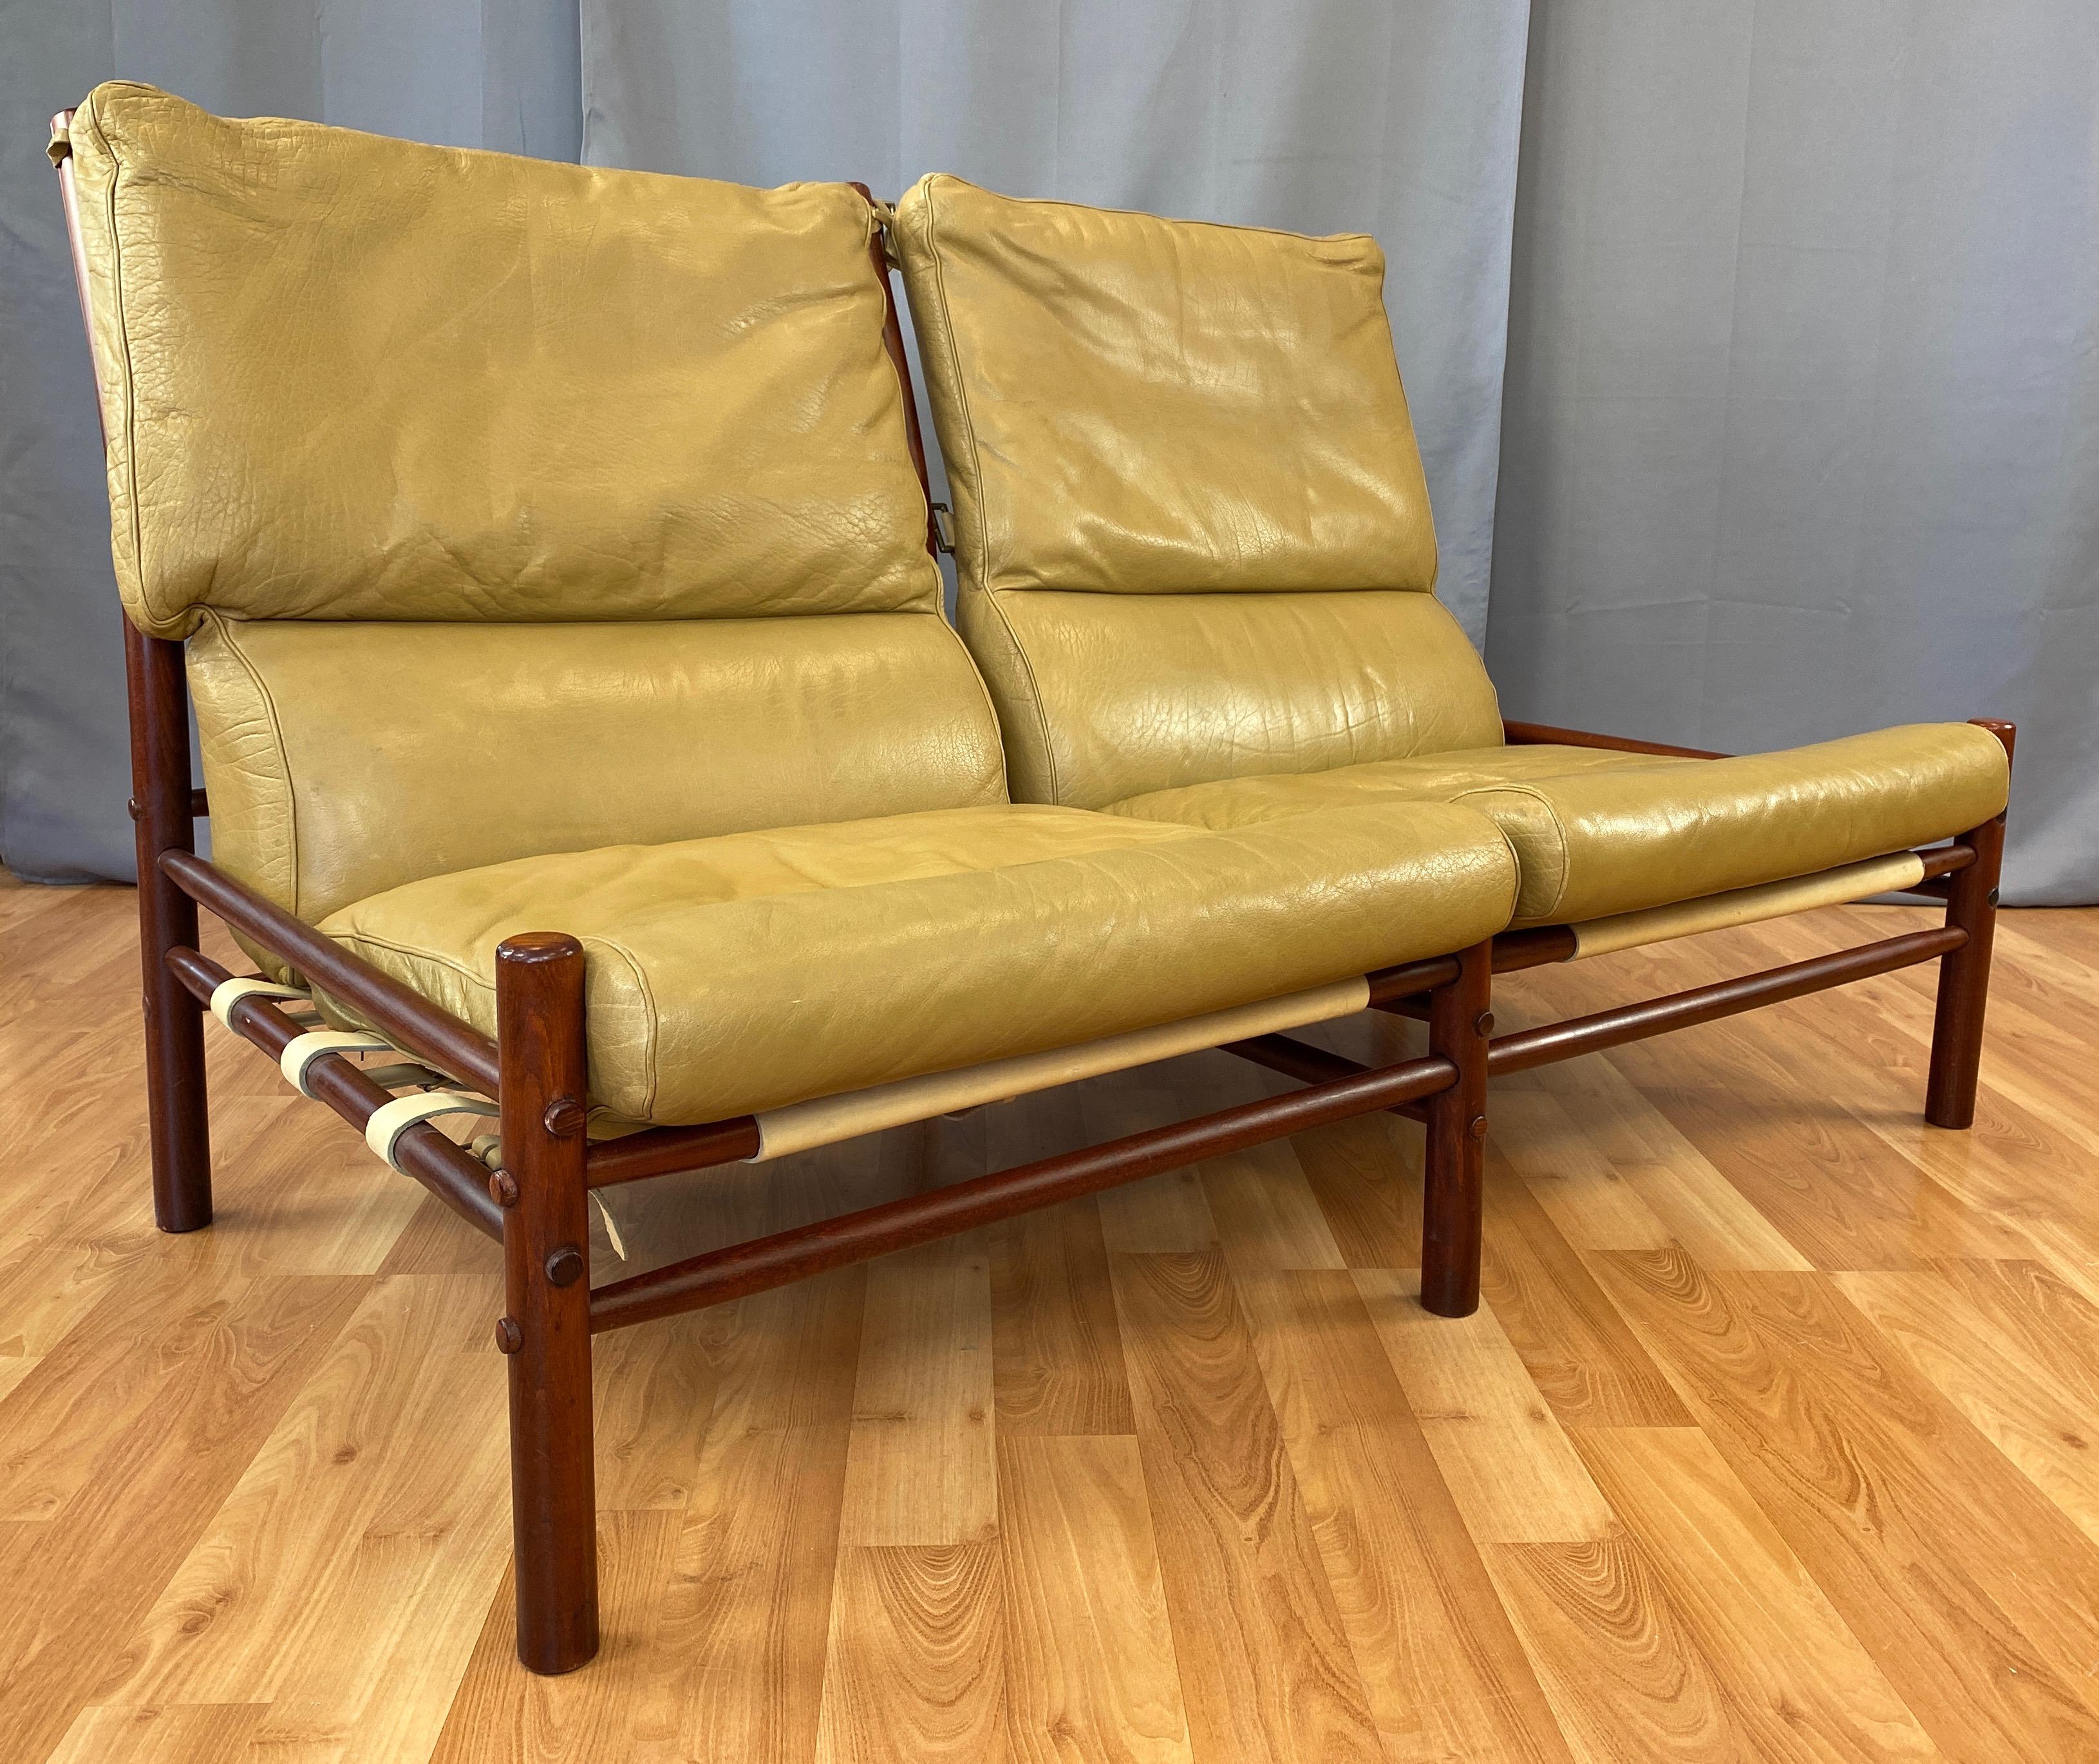 Swedish Arne Norell Inca Armless Settee in Teak-Colored Beech and Tan Leather, 1970s